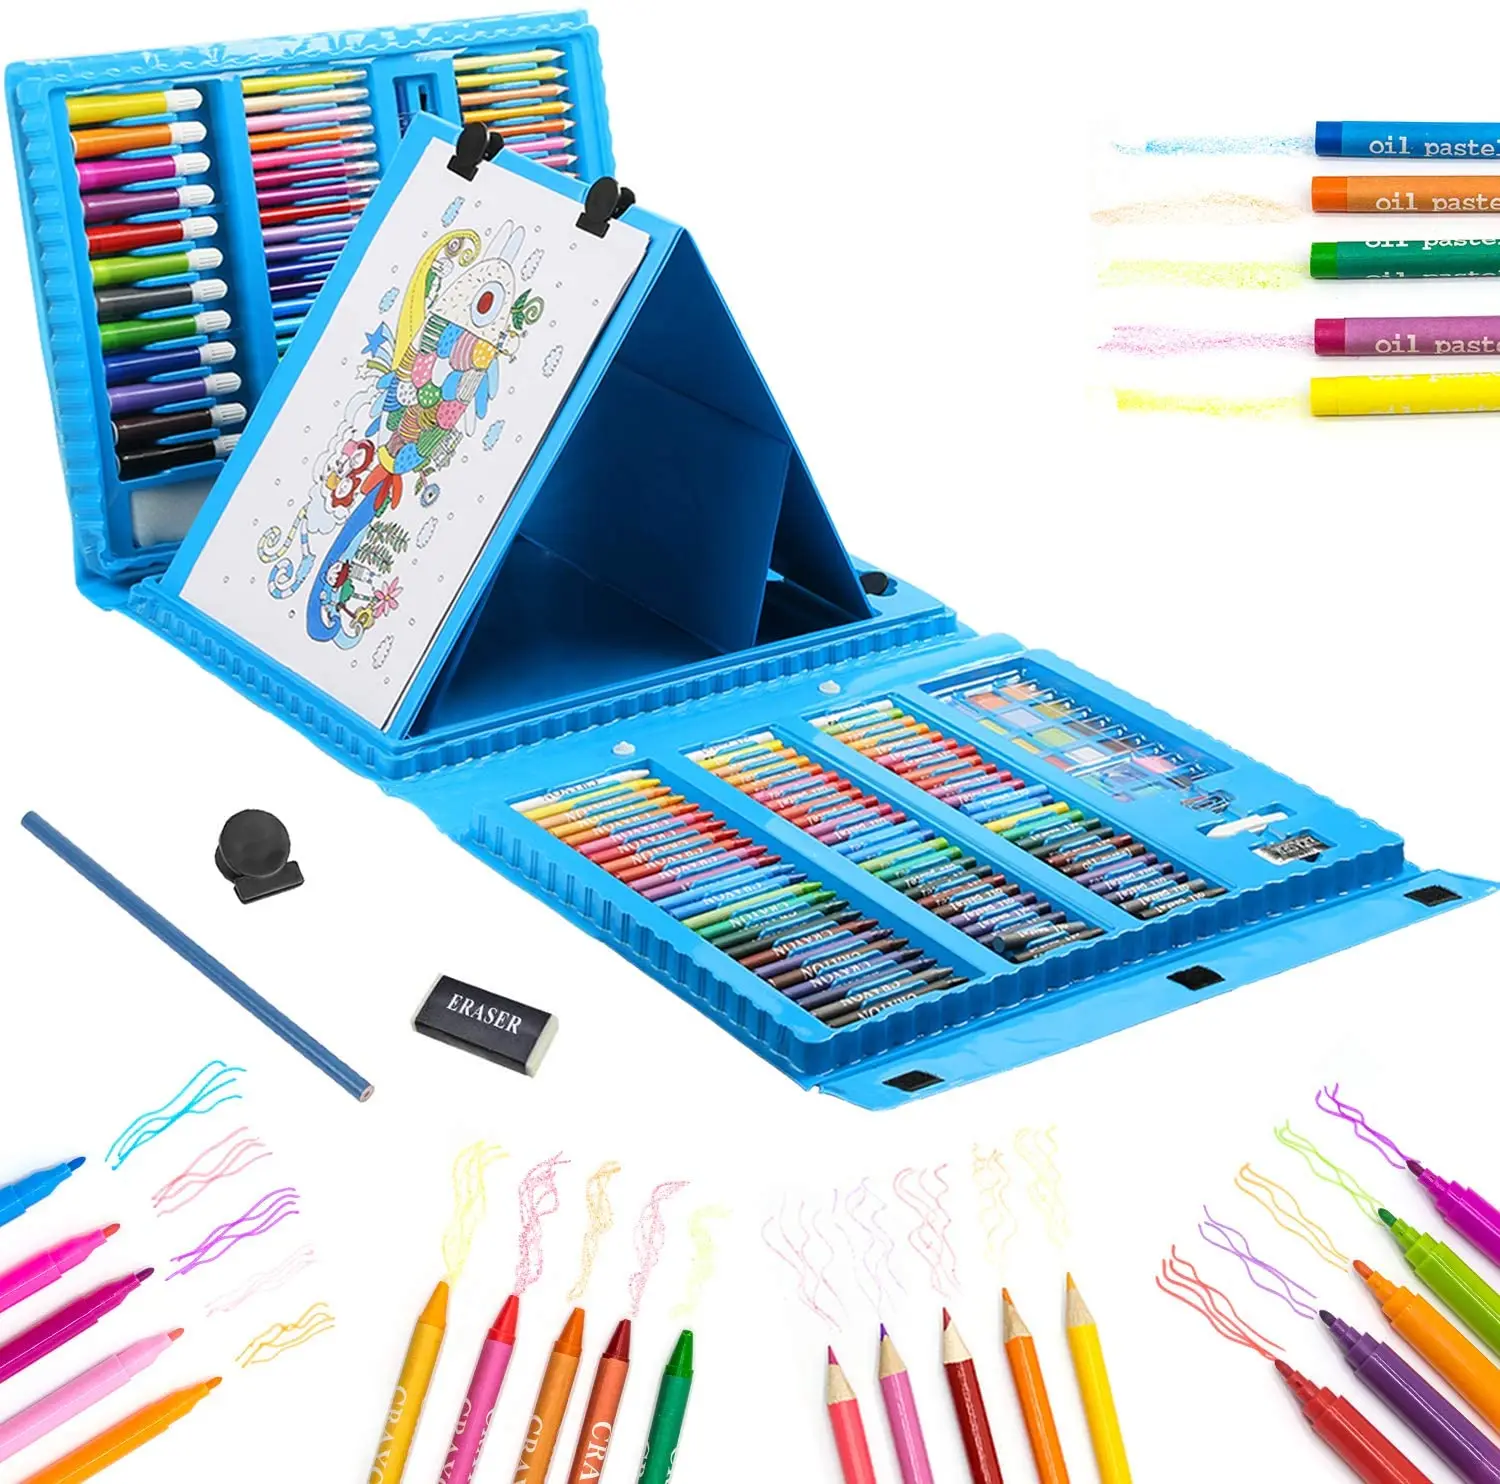 Art Supplies for Kids, 150 Pieces Art Set Crafts Drawing Painting Kit,  Portable Art Case Art Kits Includes Oil Pastels, Crayons, Colored Pencils,  Creative Gift for Kids, Adults, Teens Girls Boys -